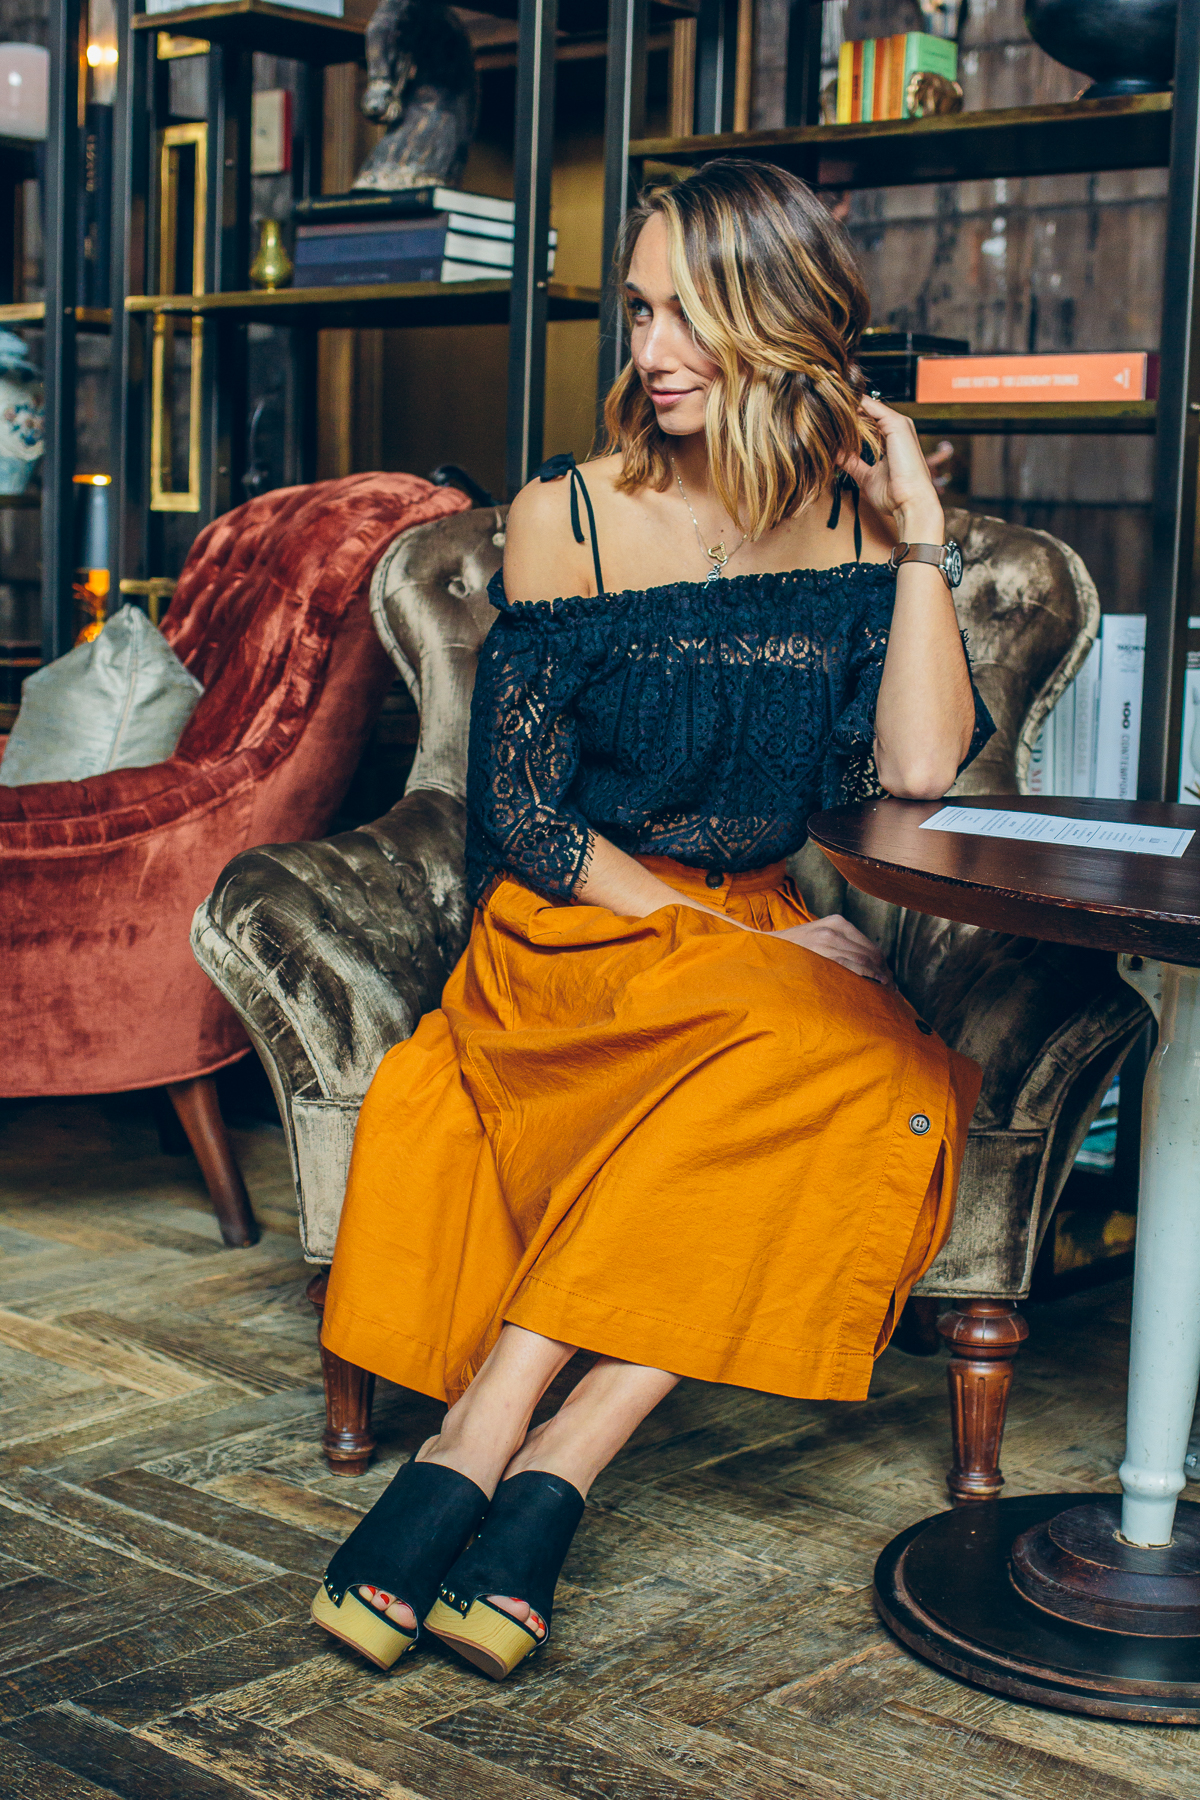 midi skirt, lace off the shoulder top, platform mules, spring outfit idea — via @TheFoxandShe